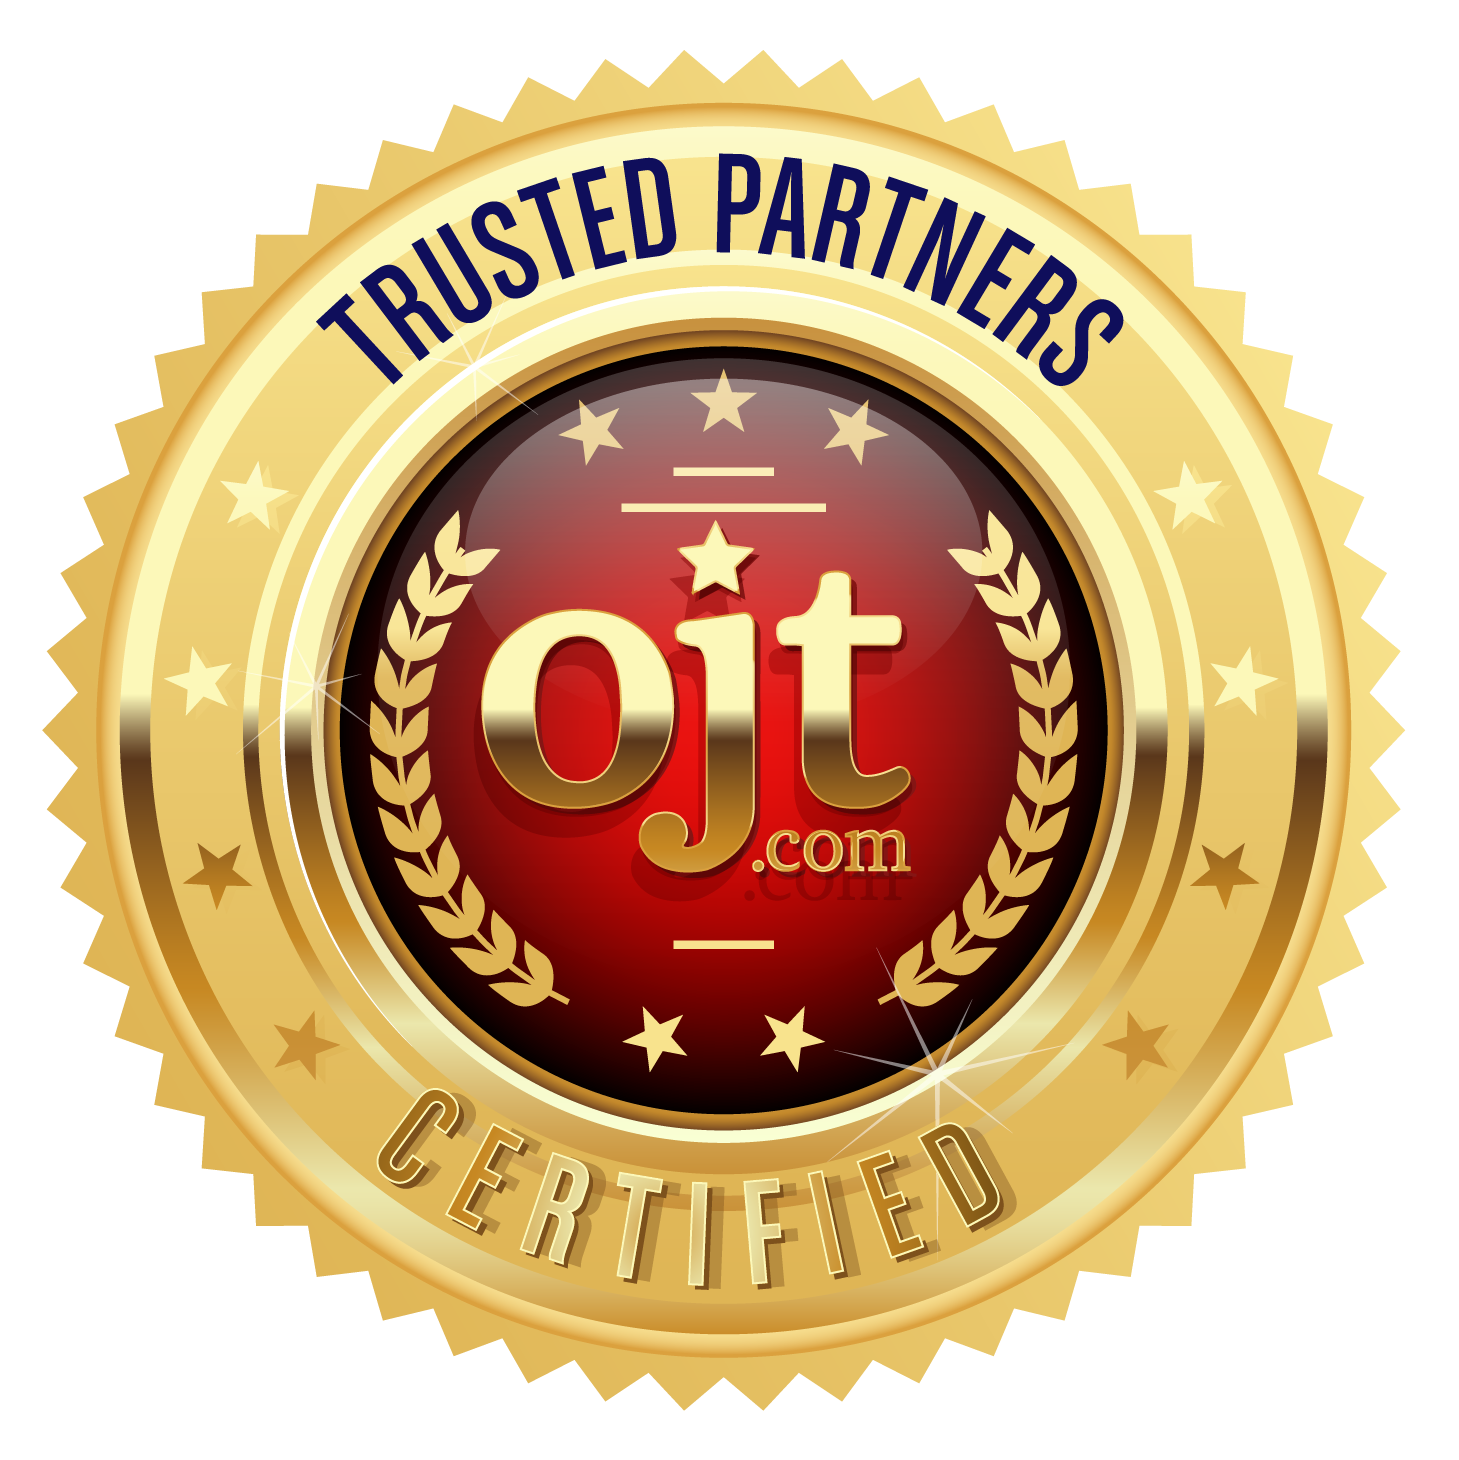 Trusted Partners